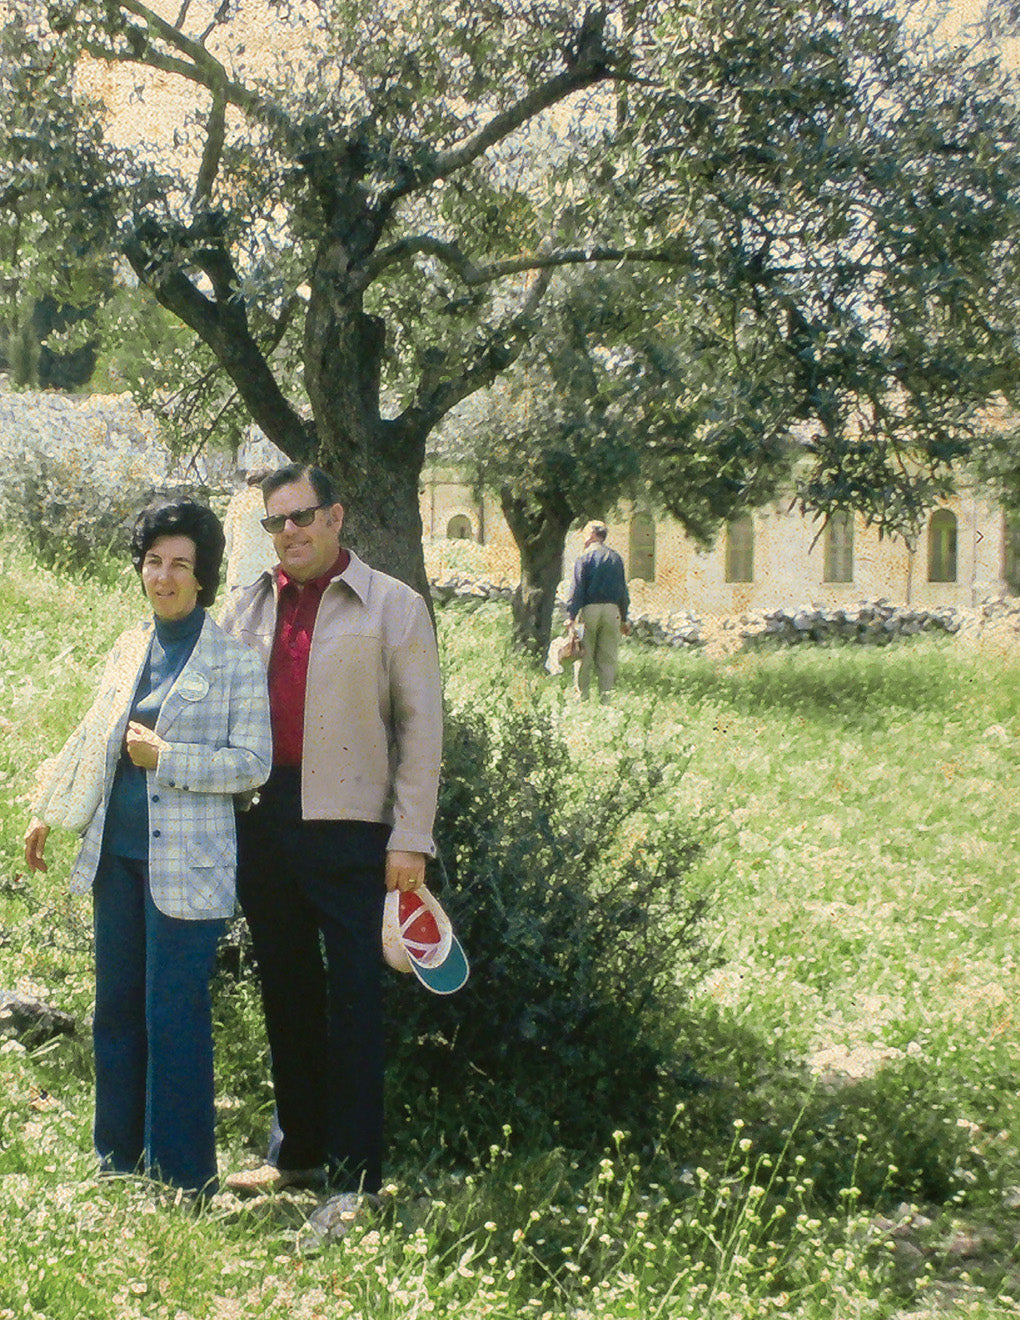 My grandparents, Betty and Claude Amburgy, in the Garden of Gethsemane.